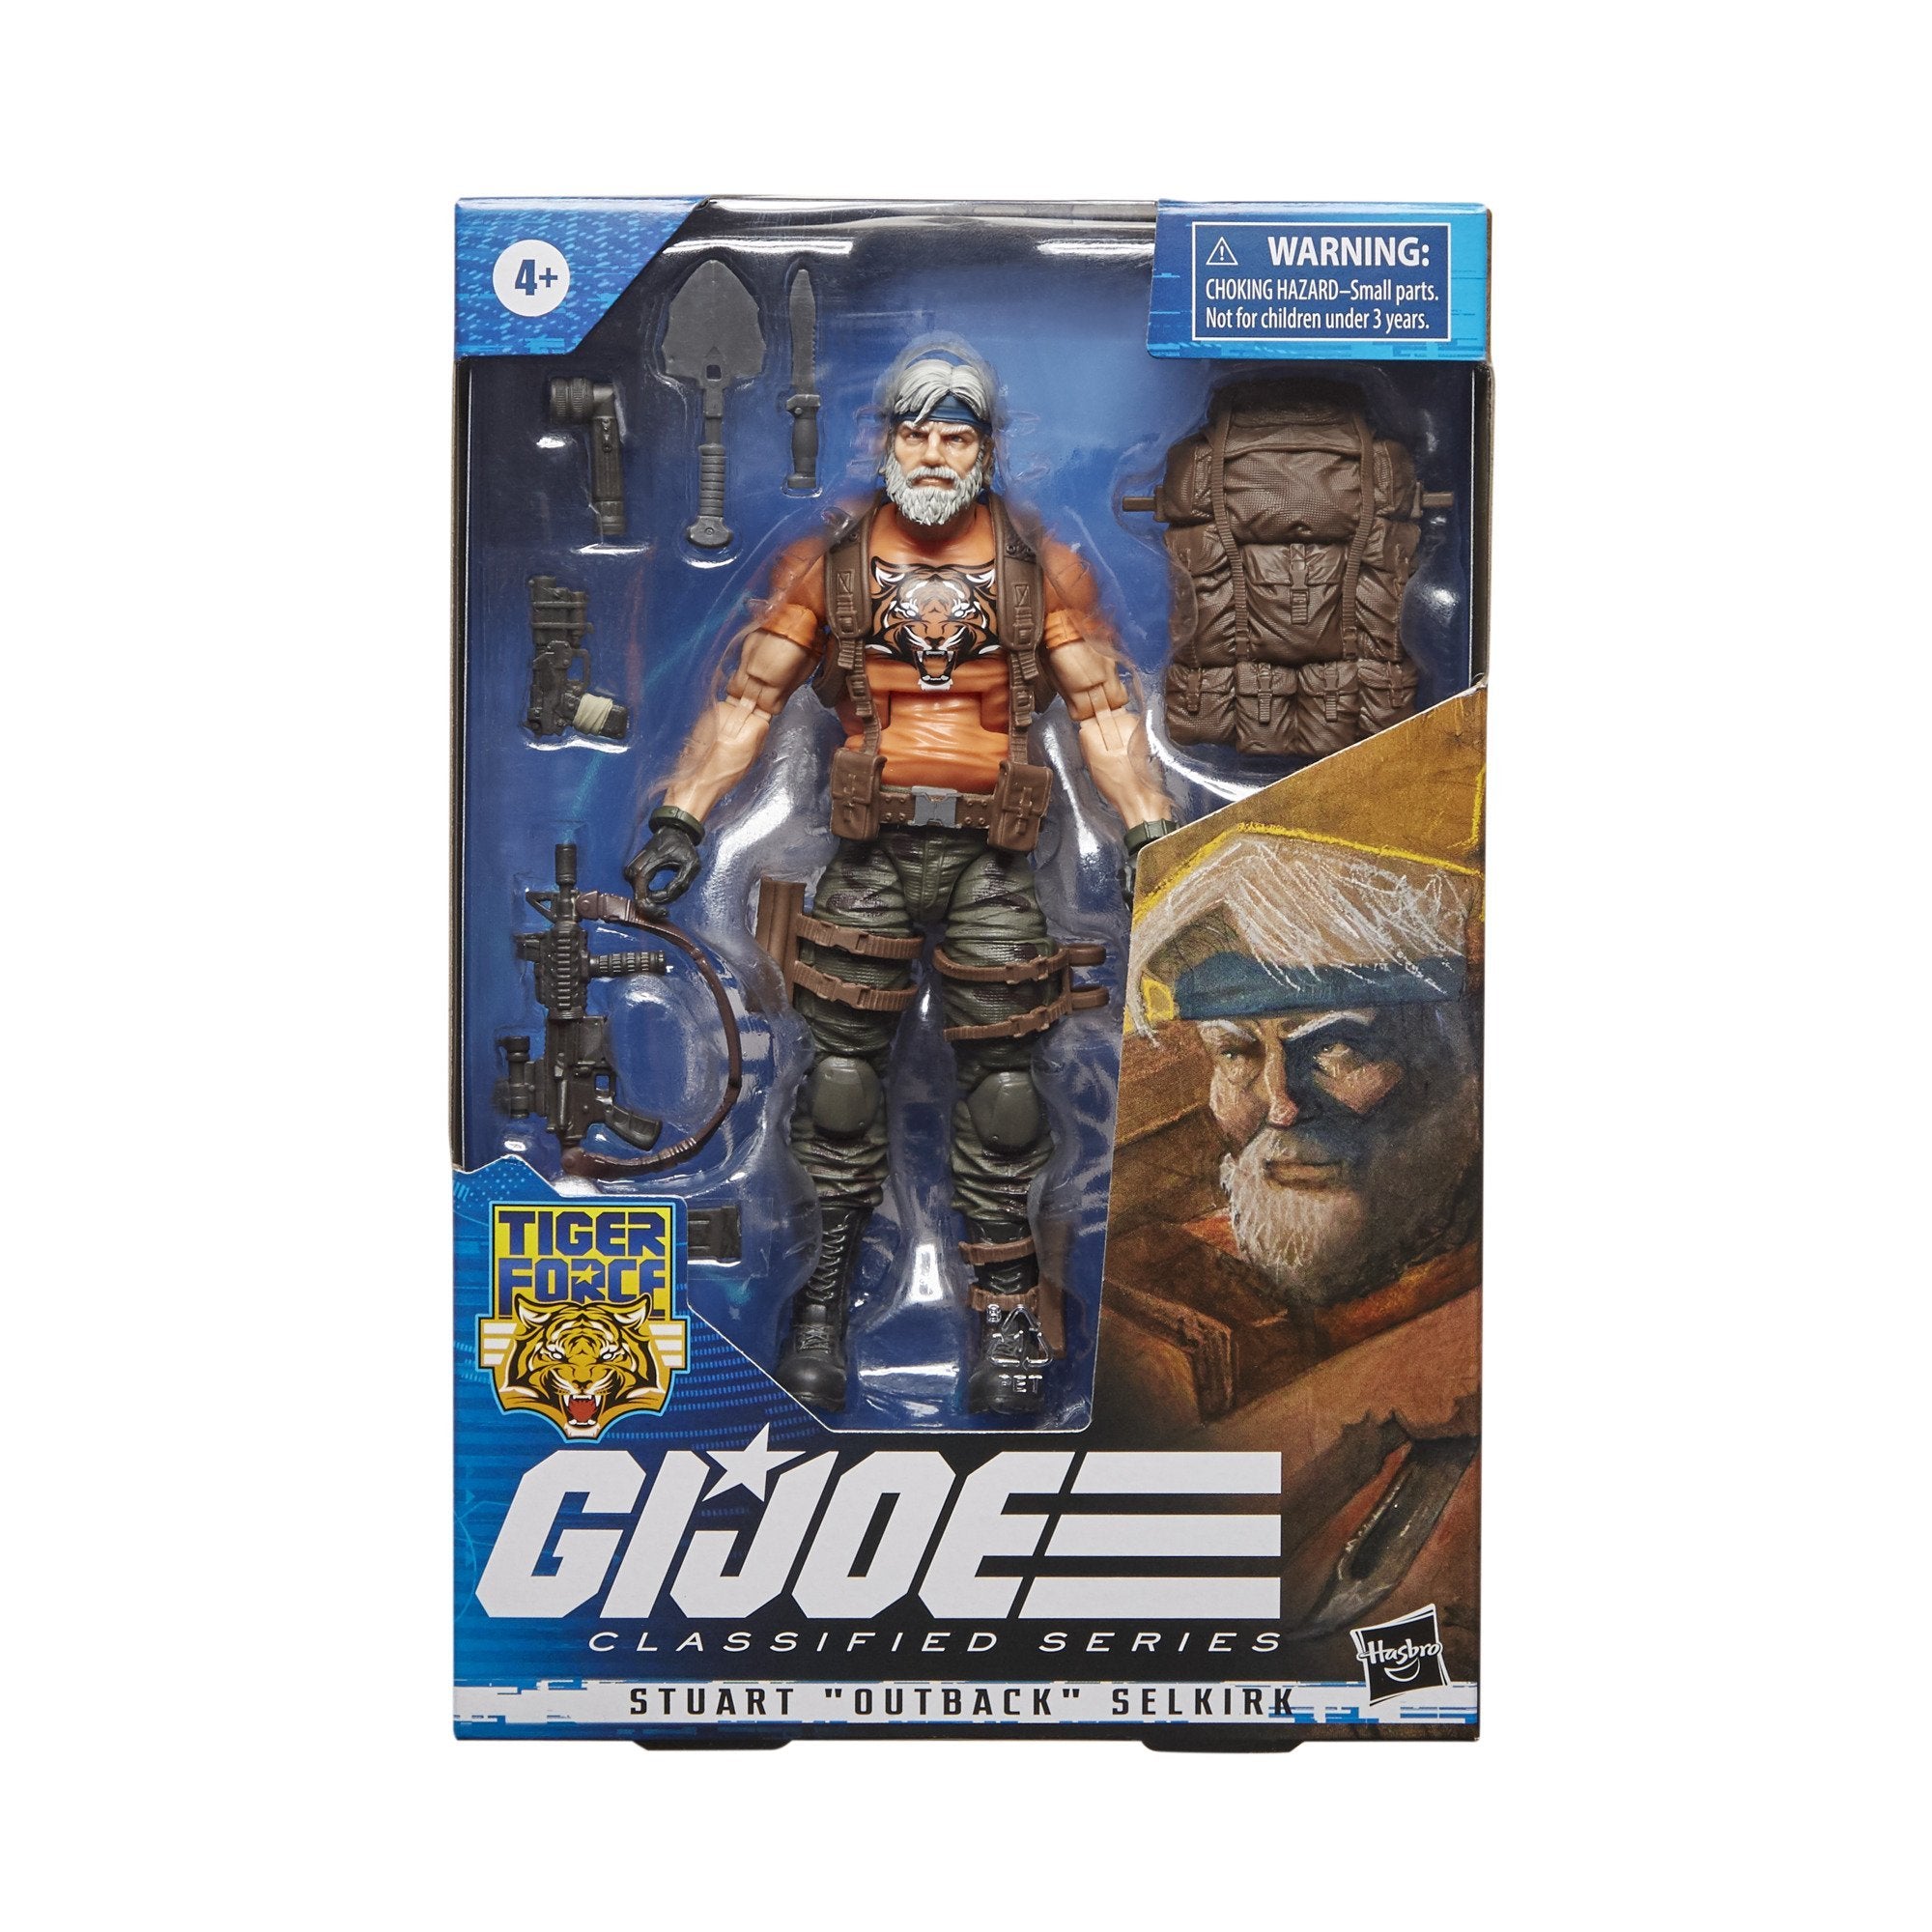 G.I. Joe Classified Series - Stuart “Outback” Selkirk [Target Exclusive Edition]